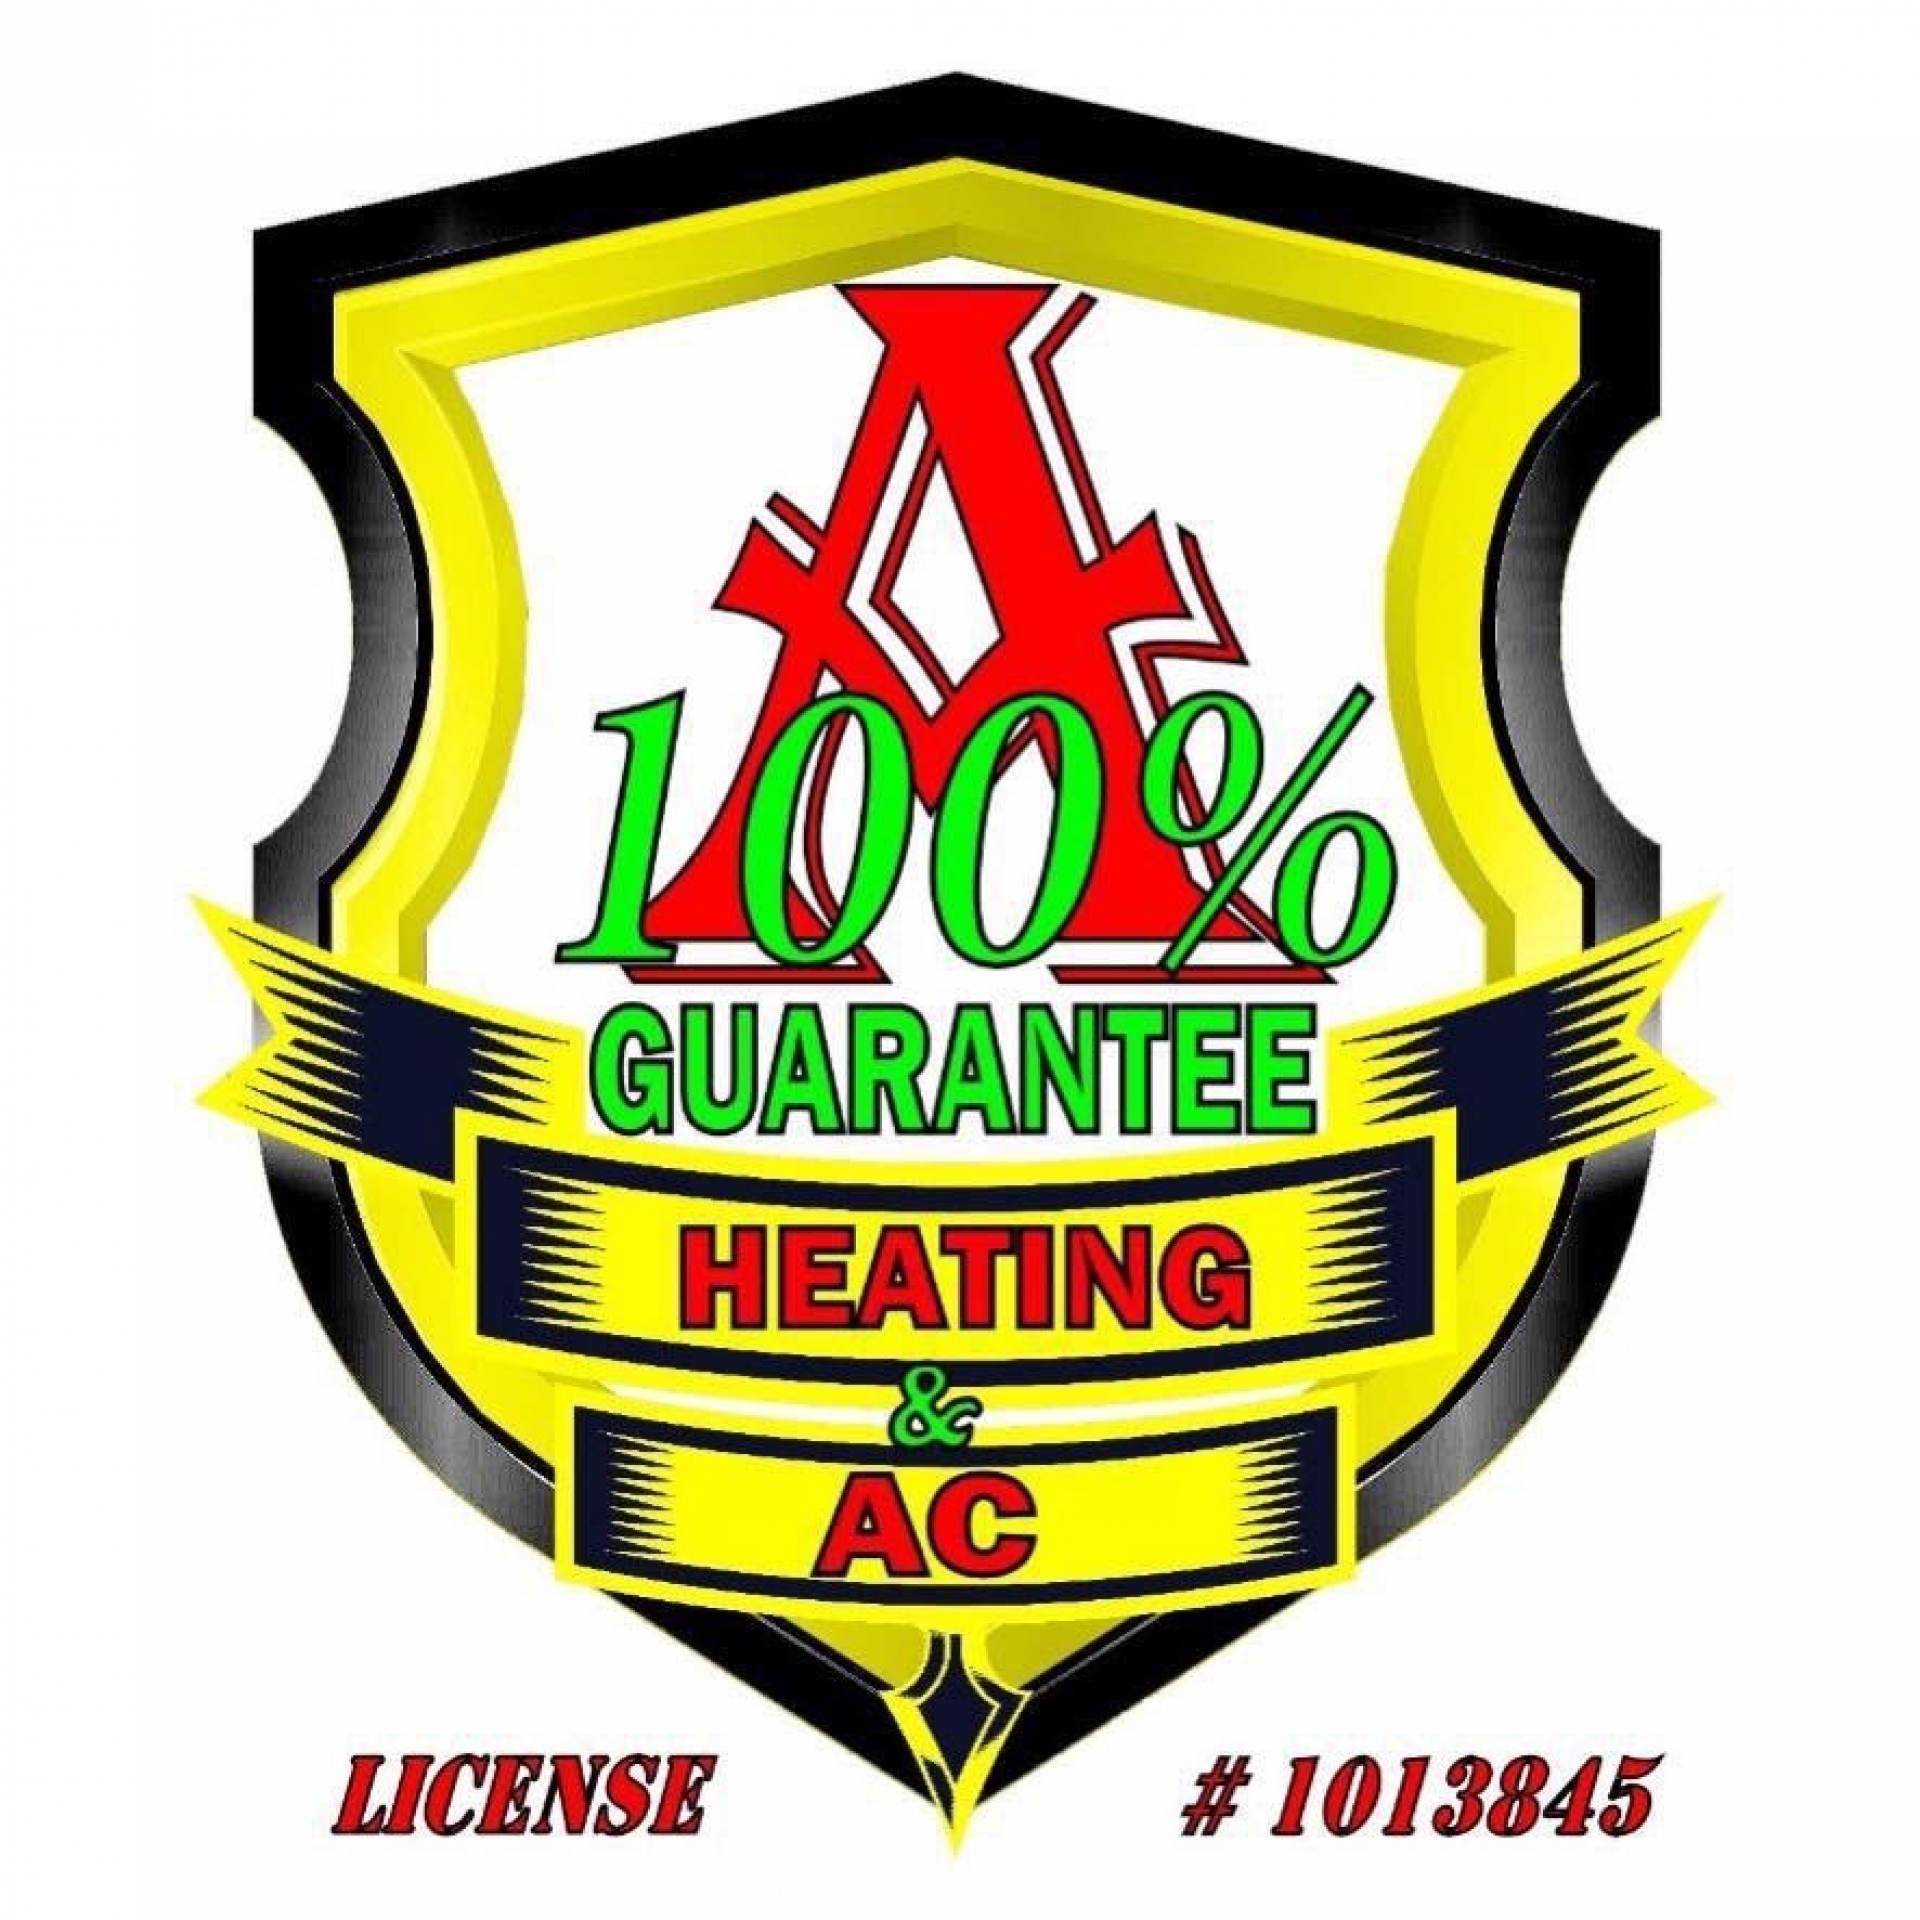 A 100 Guarantee Heating And AC Clean Energy Connection